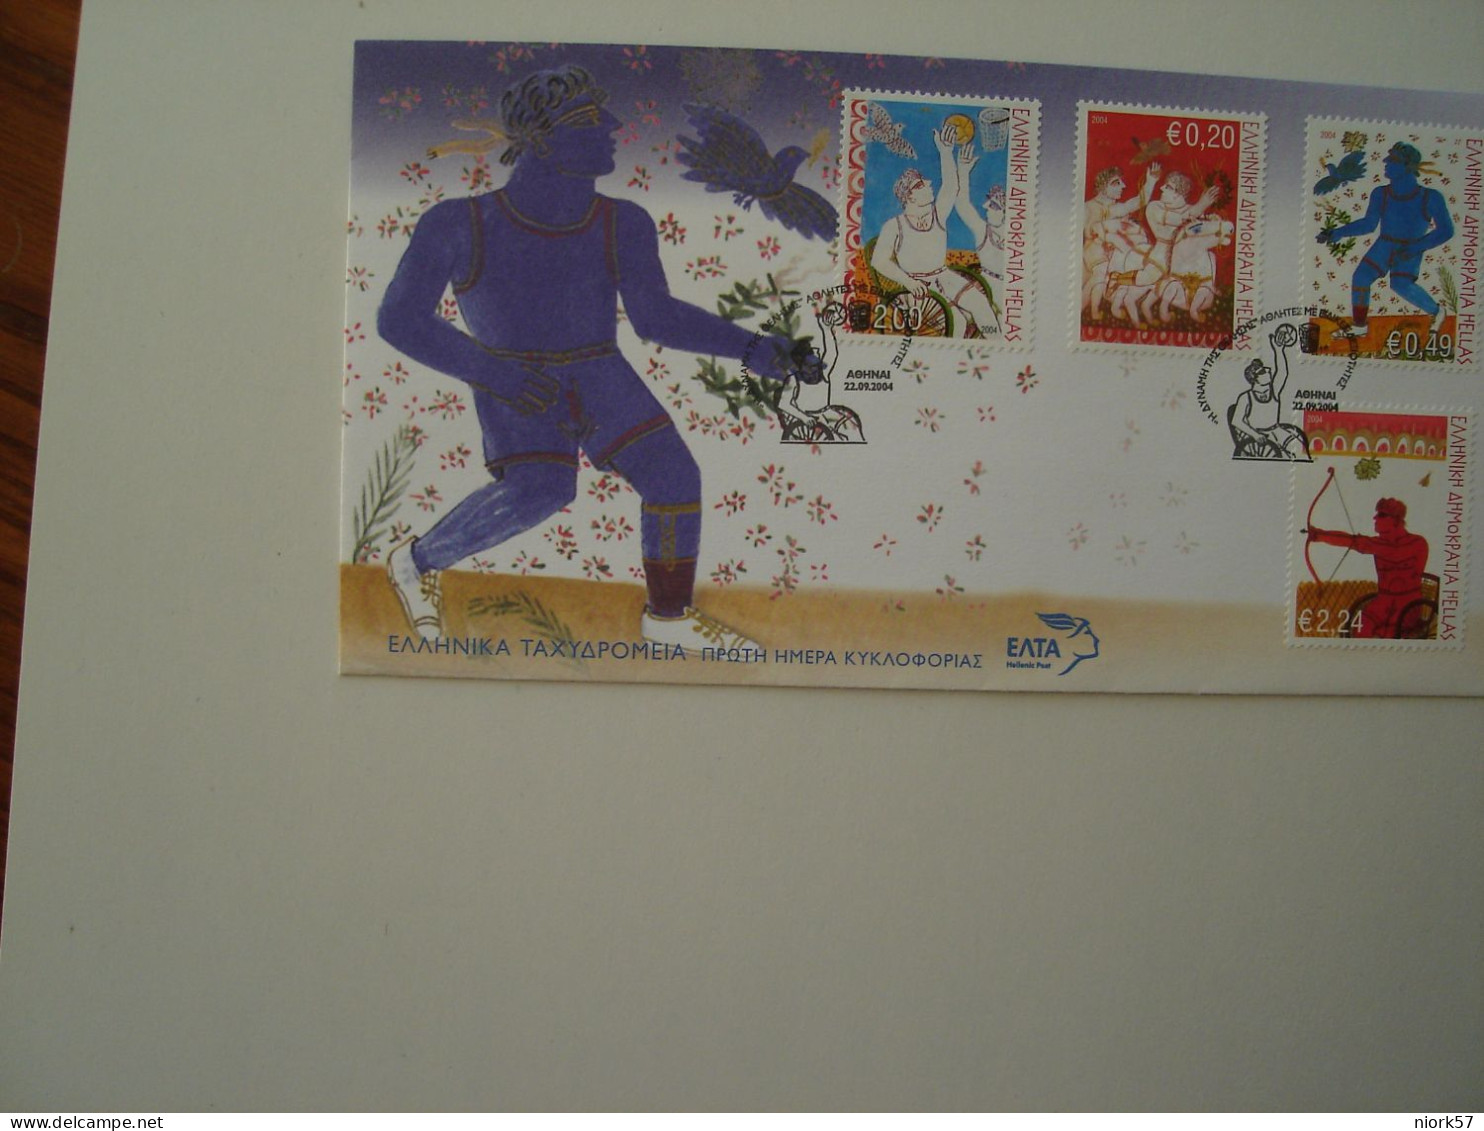 GREECE  FDC 2004  OLYMPIC GAMES  ATHENS   2004   ATHLETIC - Summer 2004: Athens